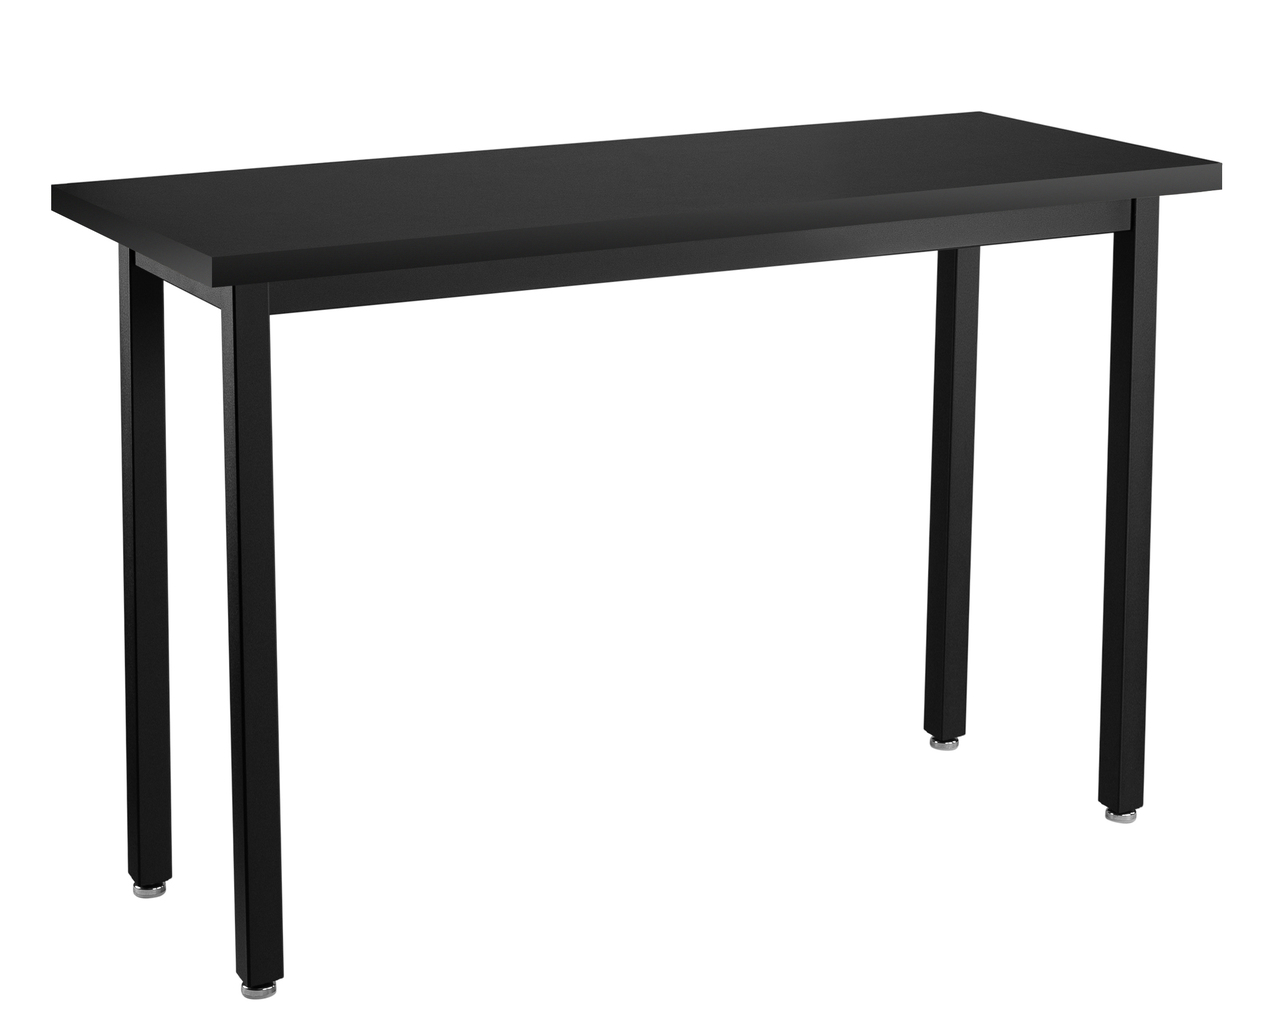 NPS Steel Science Lab Table -  18" x 48" -  Phenolic Top - Black Surface Color